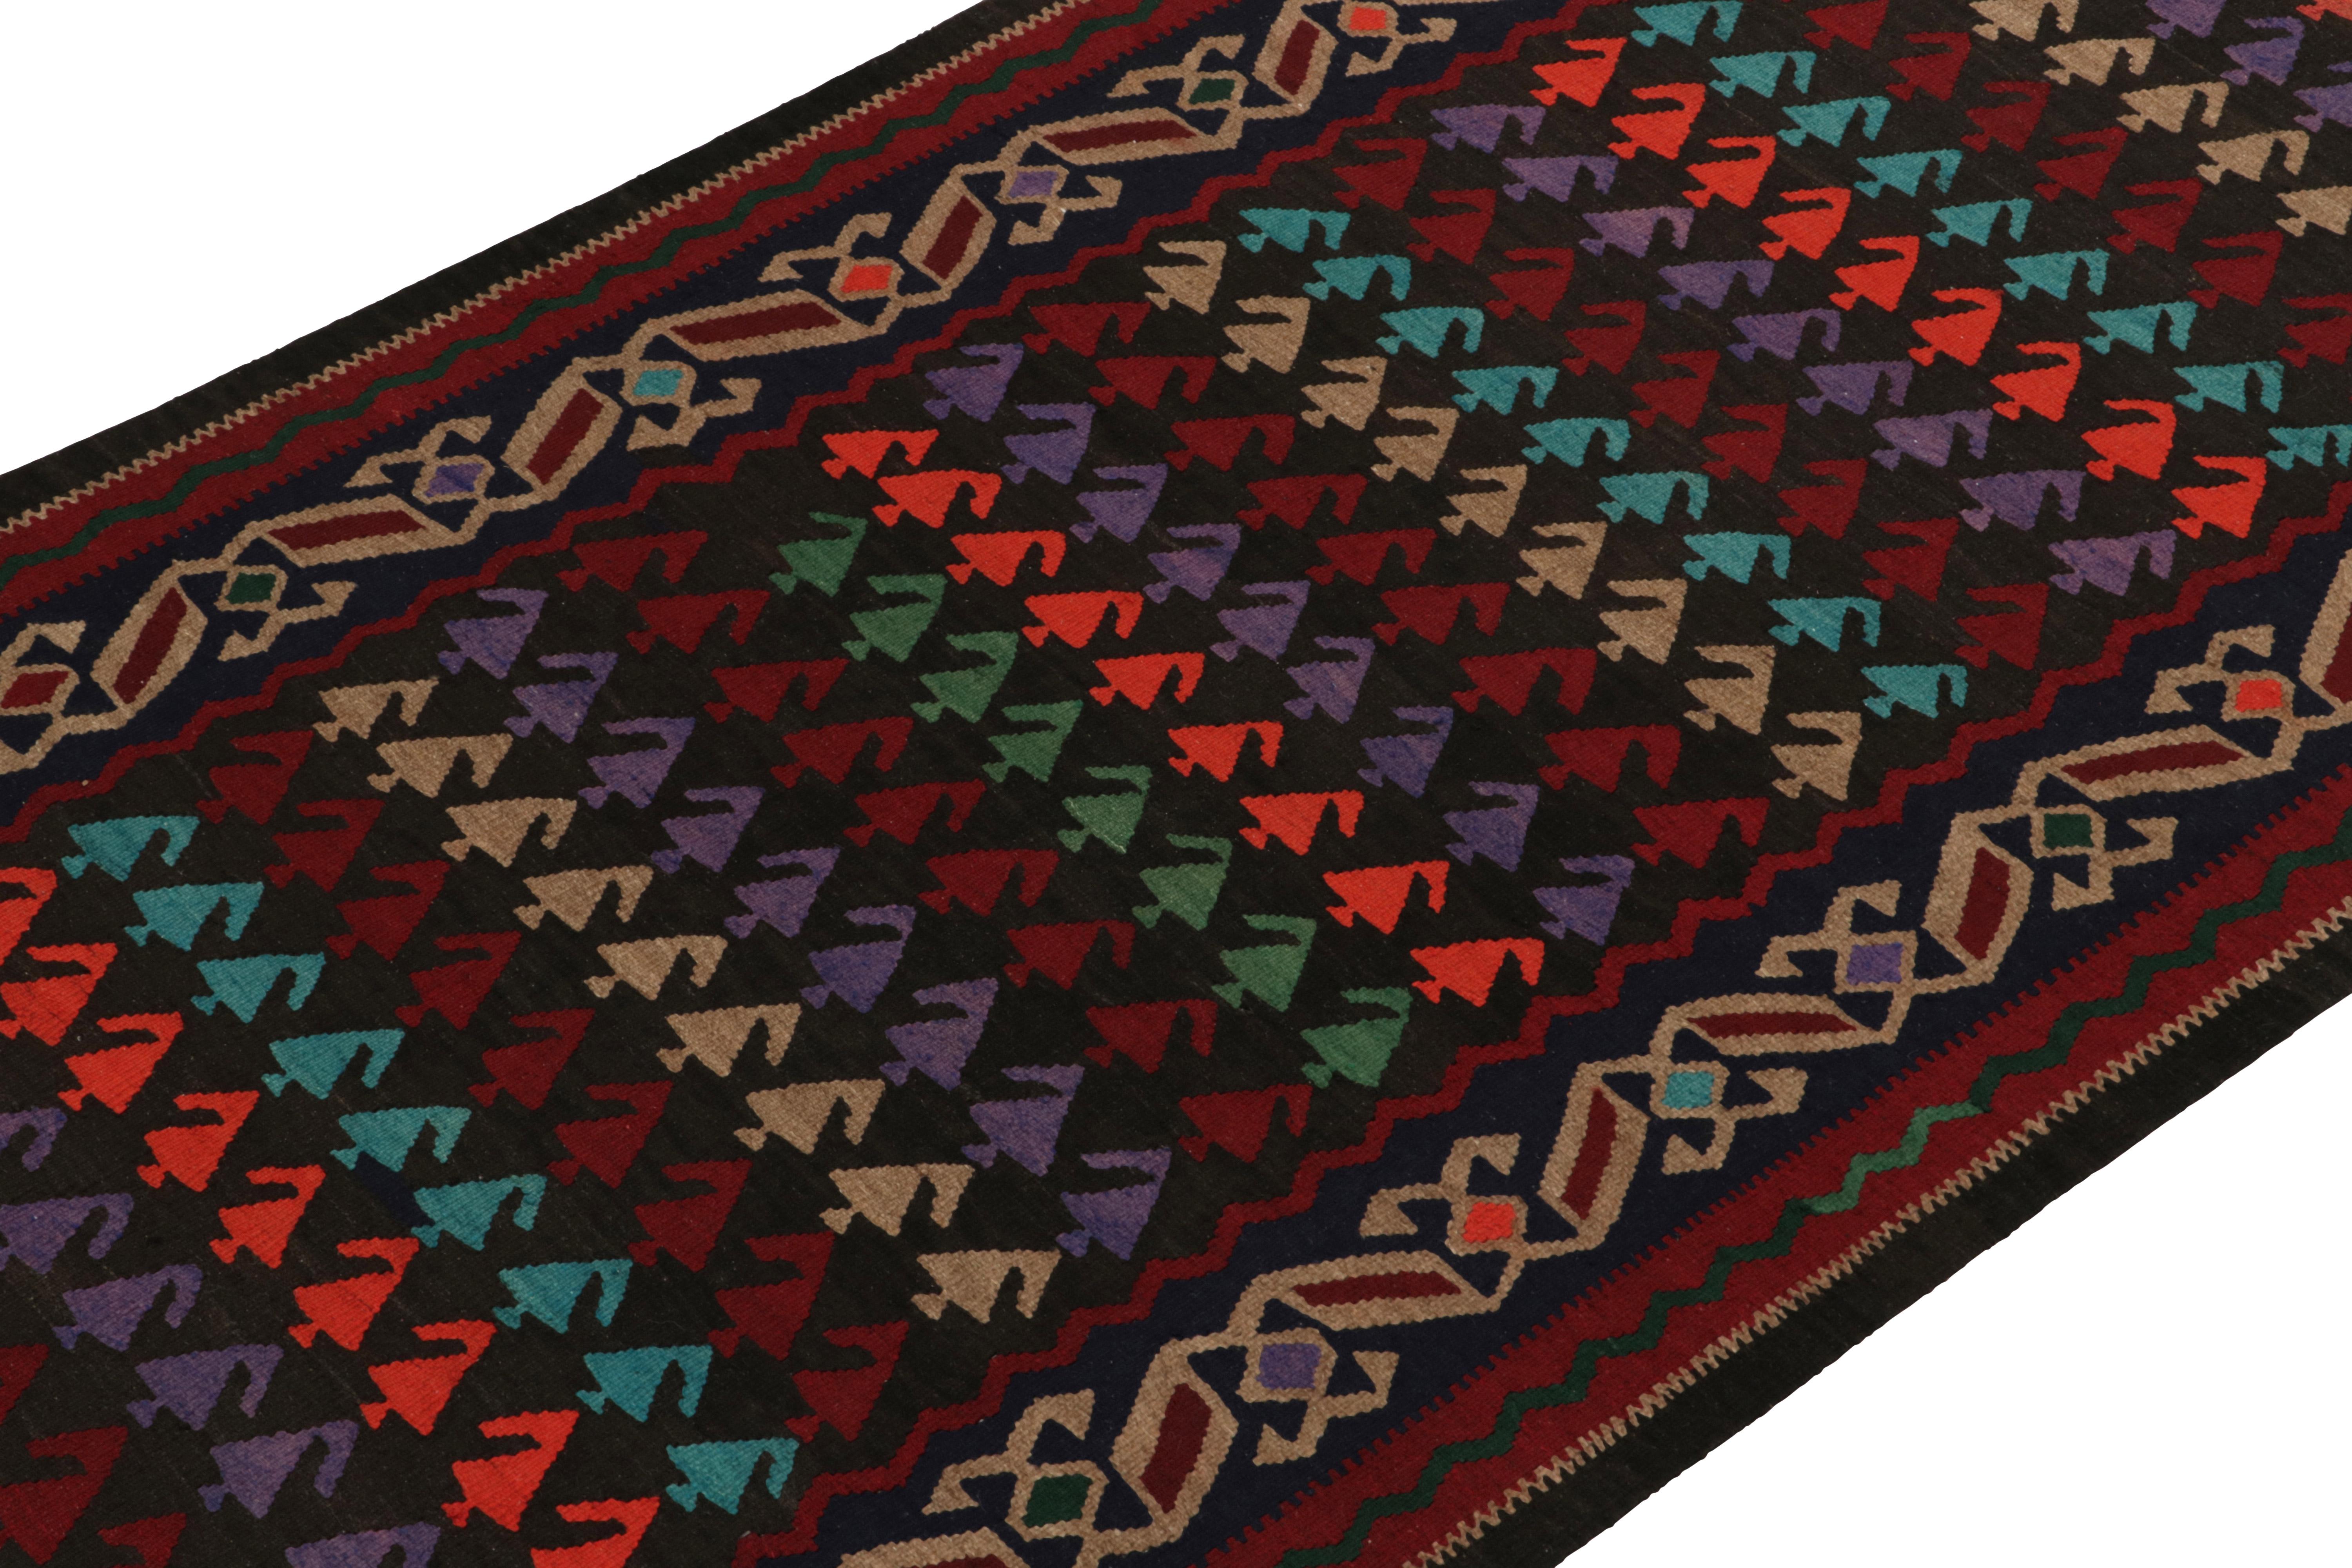 Vintage Turkish Kilim Rug in Red, Beige-Brown & MultiHued Tribal by Rug & Kilim In Good Condition For Sale In Long Island City, NY